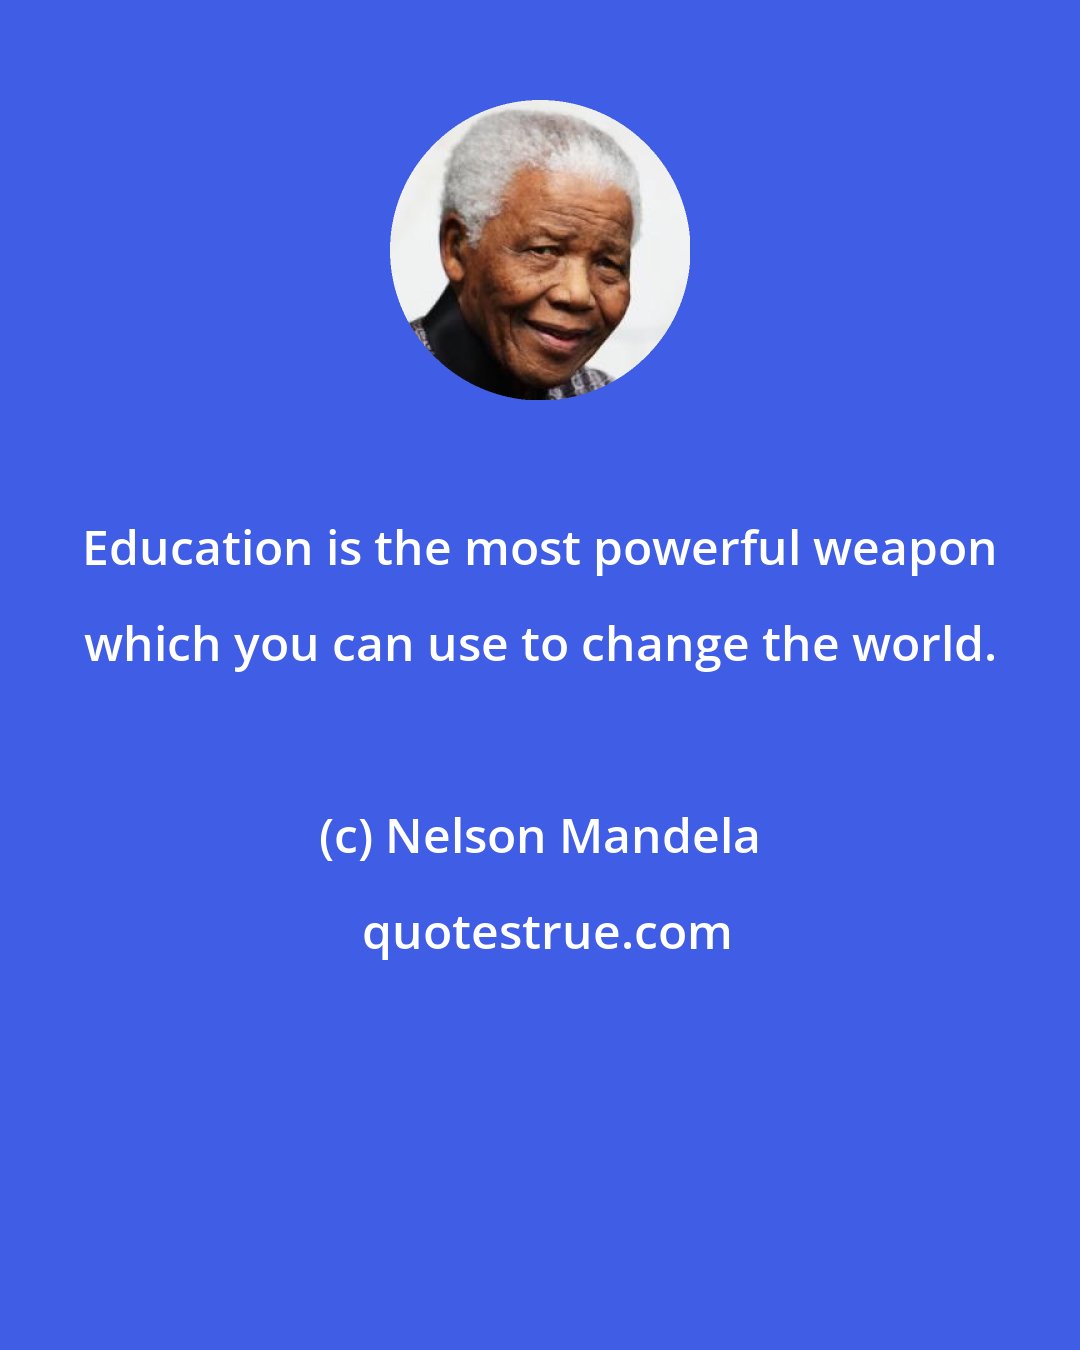 Nelson Mandela: Education is the most powerful weapon which you can use to change the world.